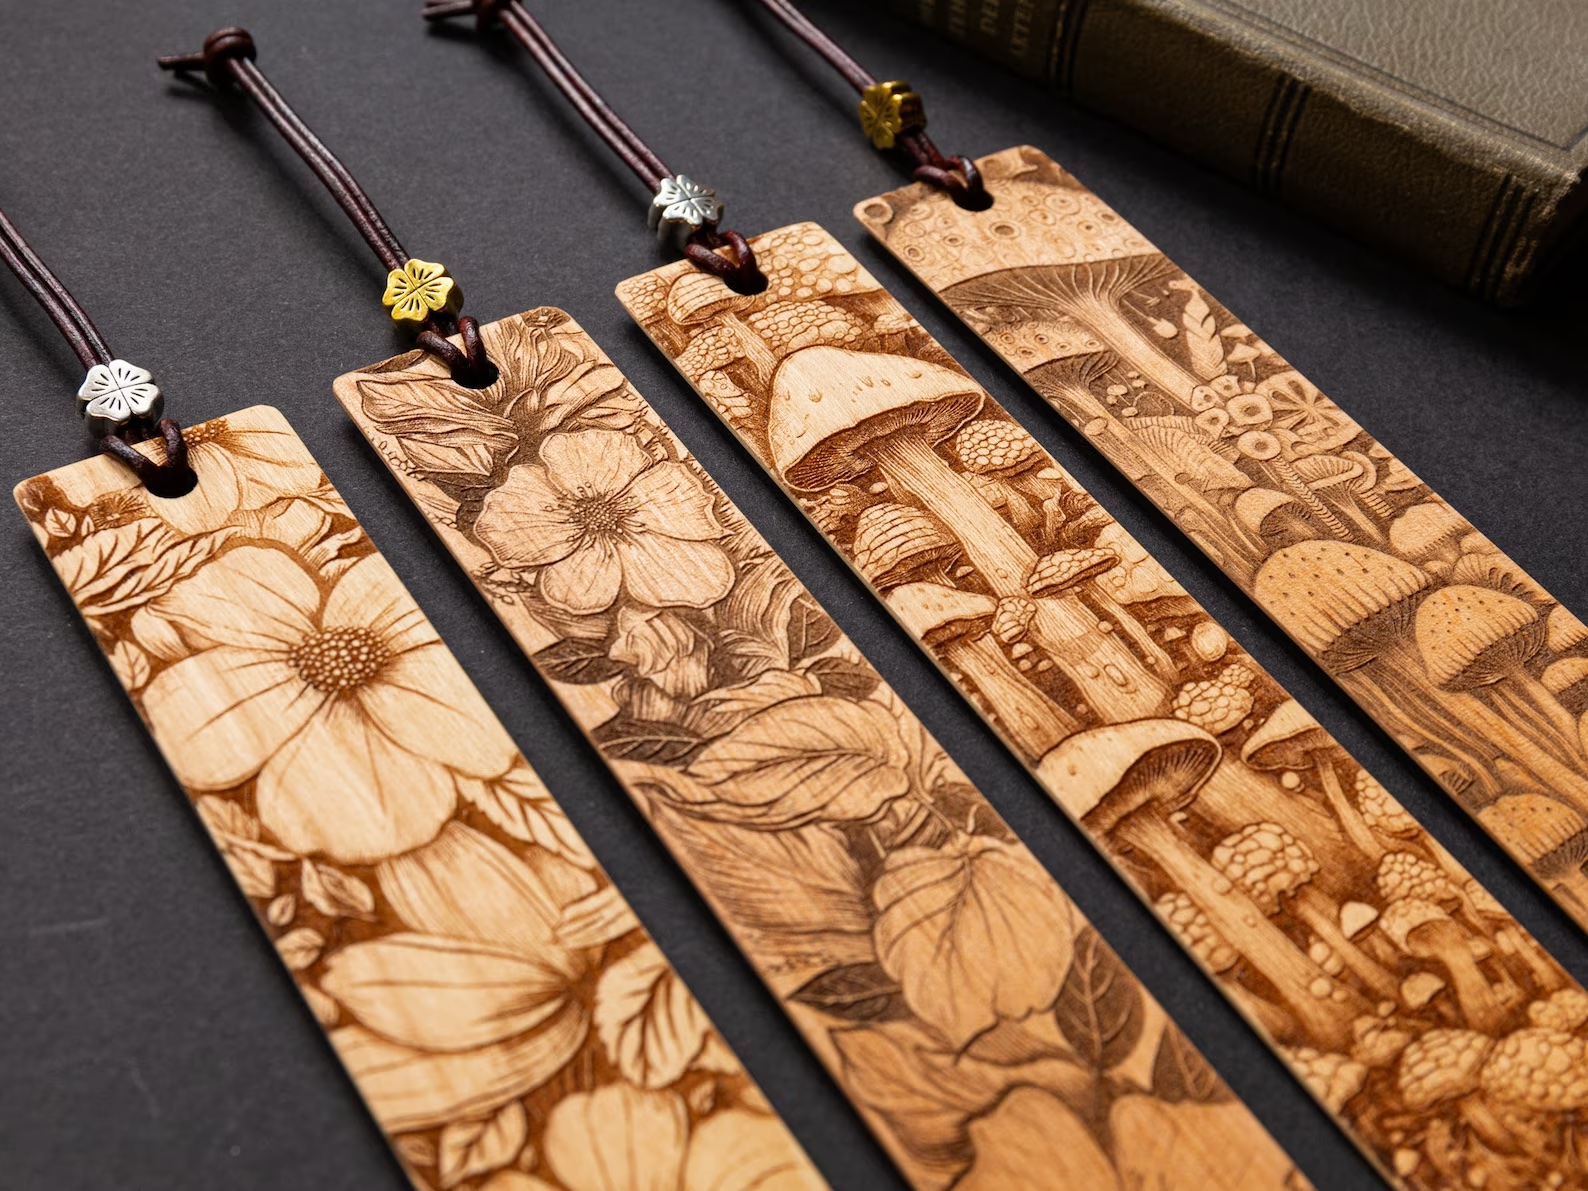 a picture of four wooden bookmarks featuring floral and mushroom designs